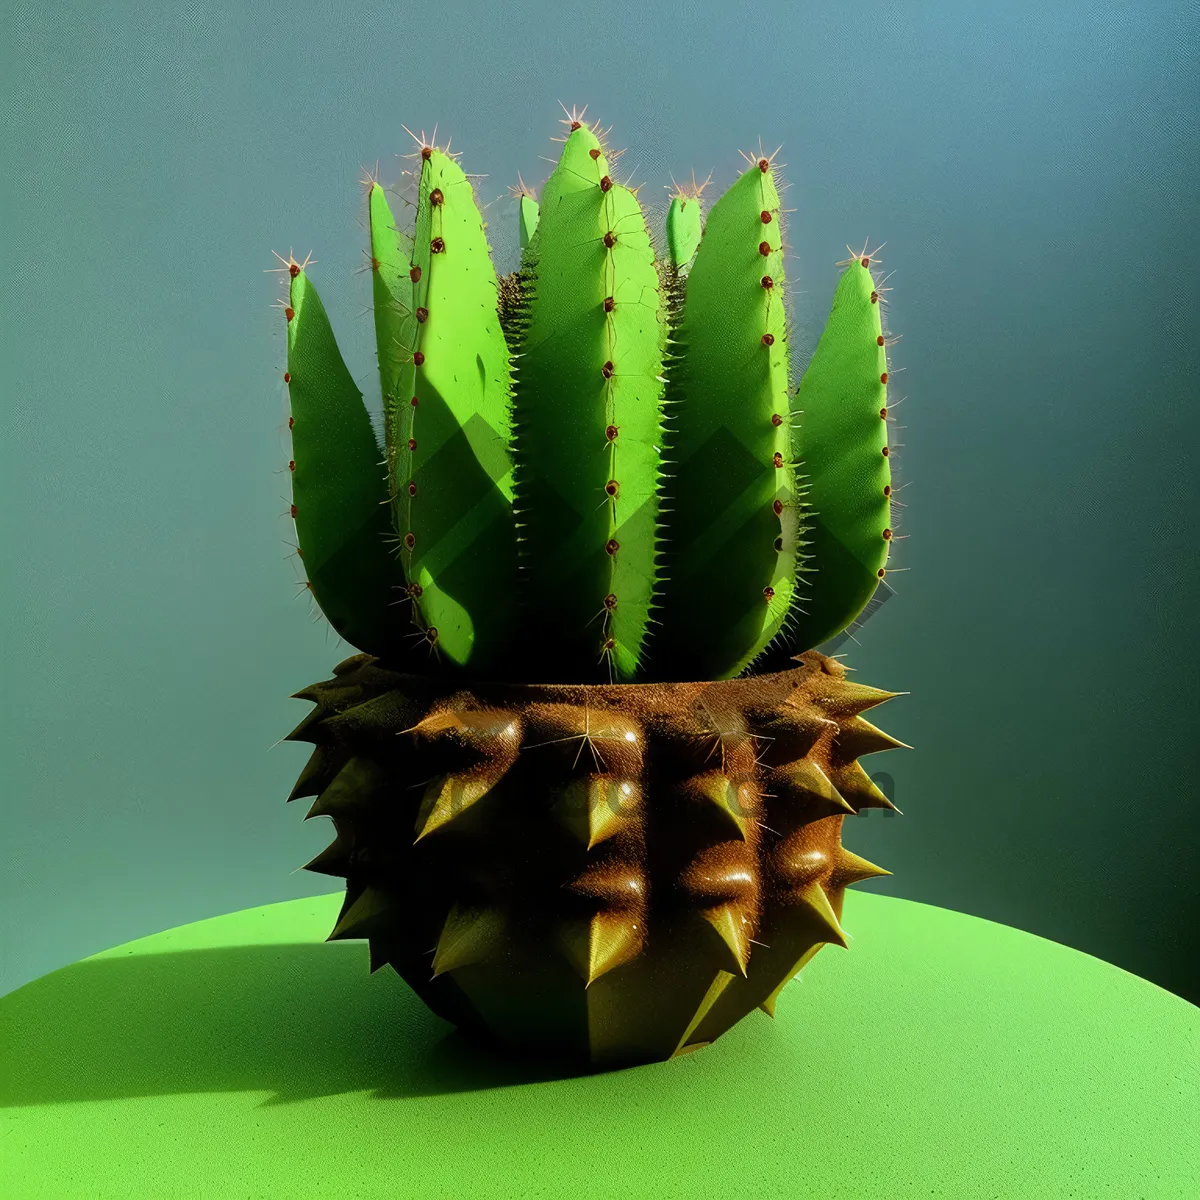 Picture of Tropical Pineapple and Cactus Edible Fruit